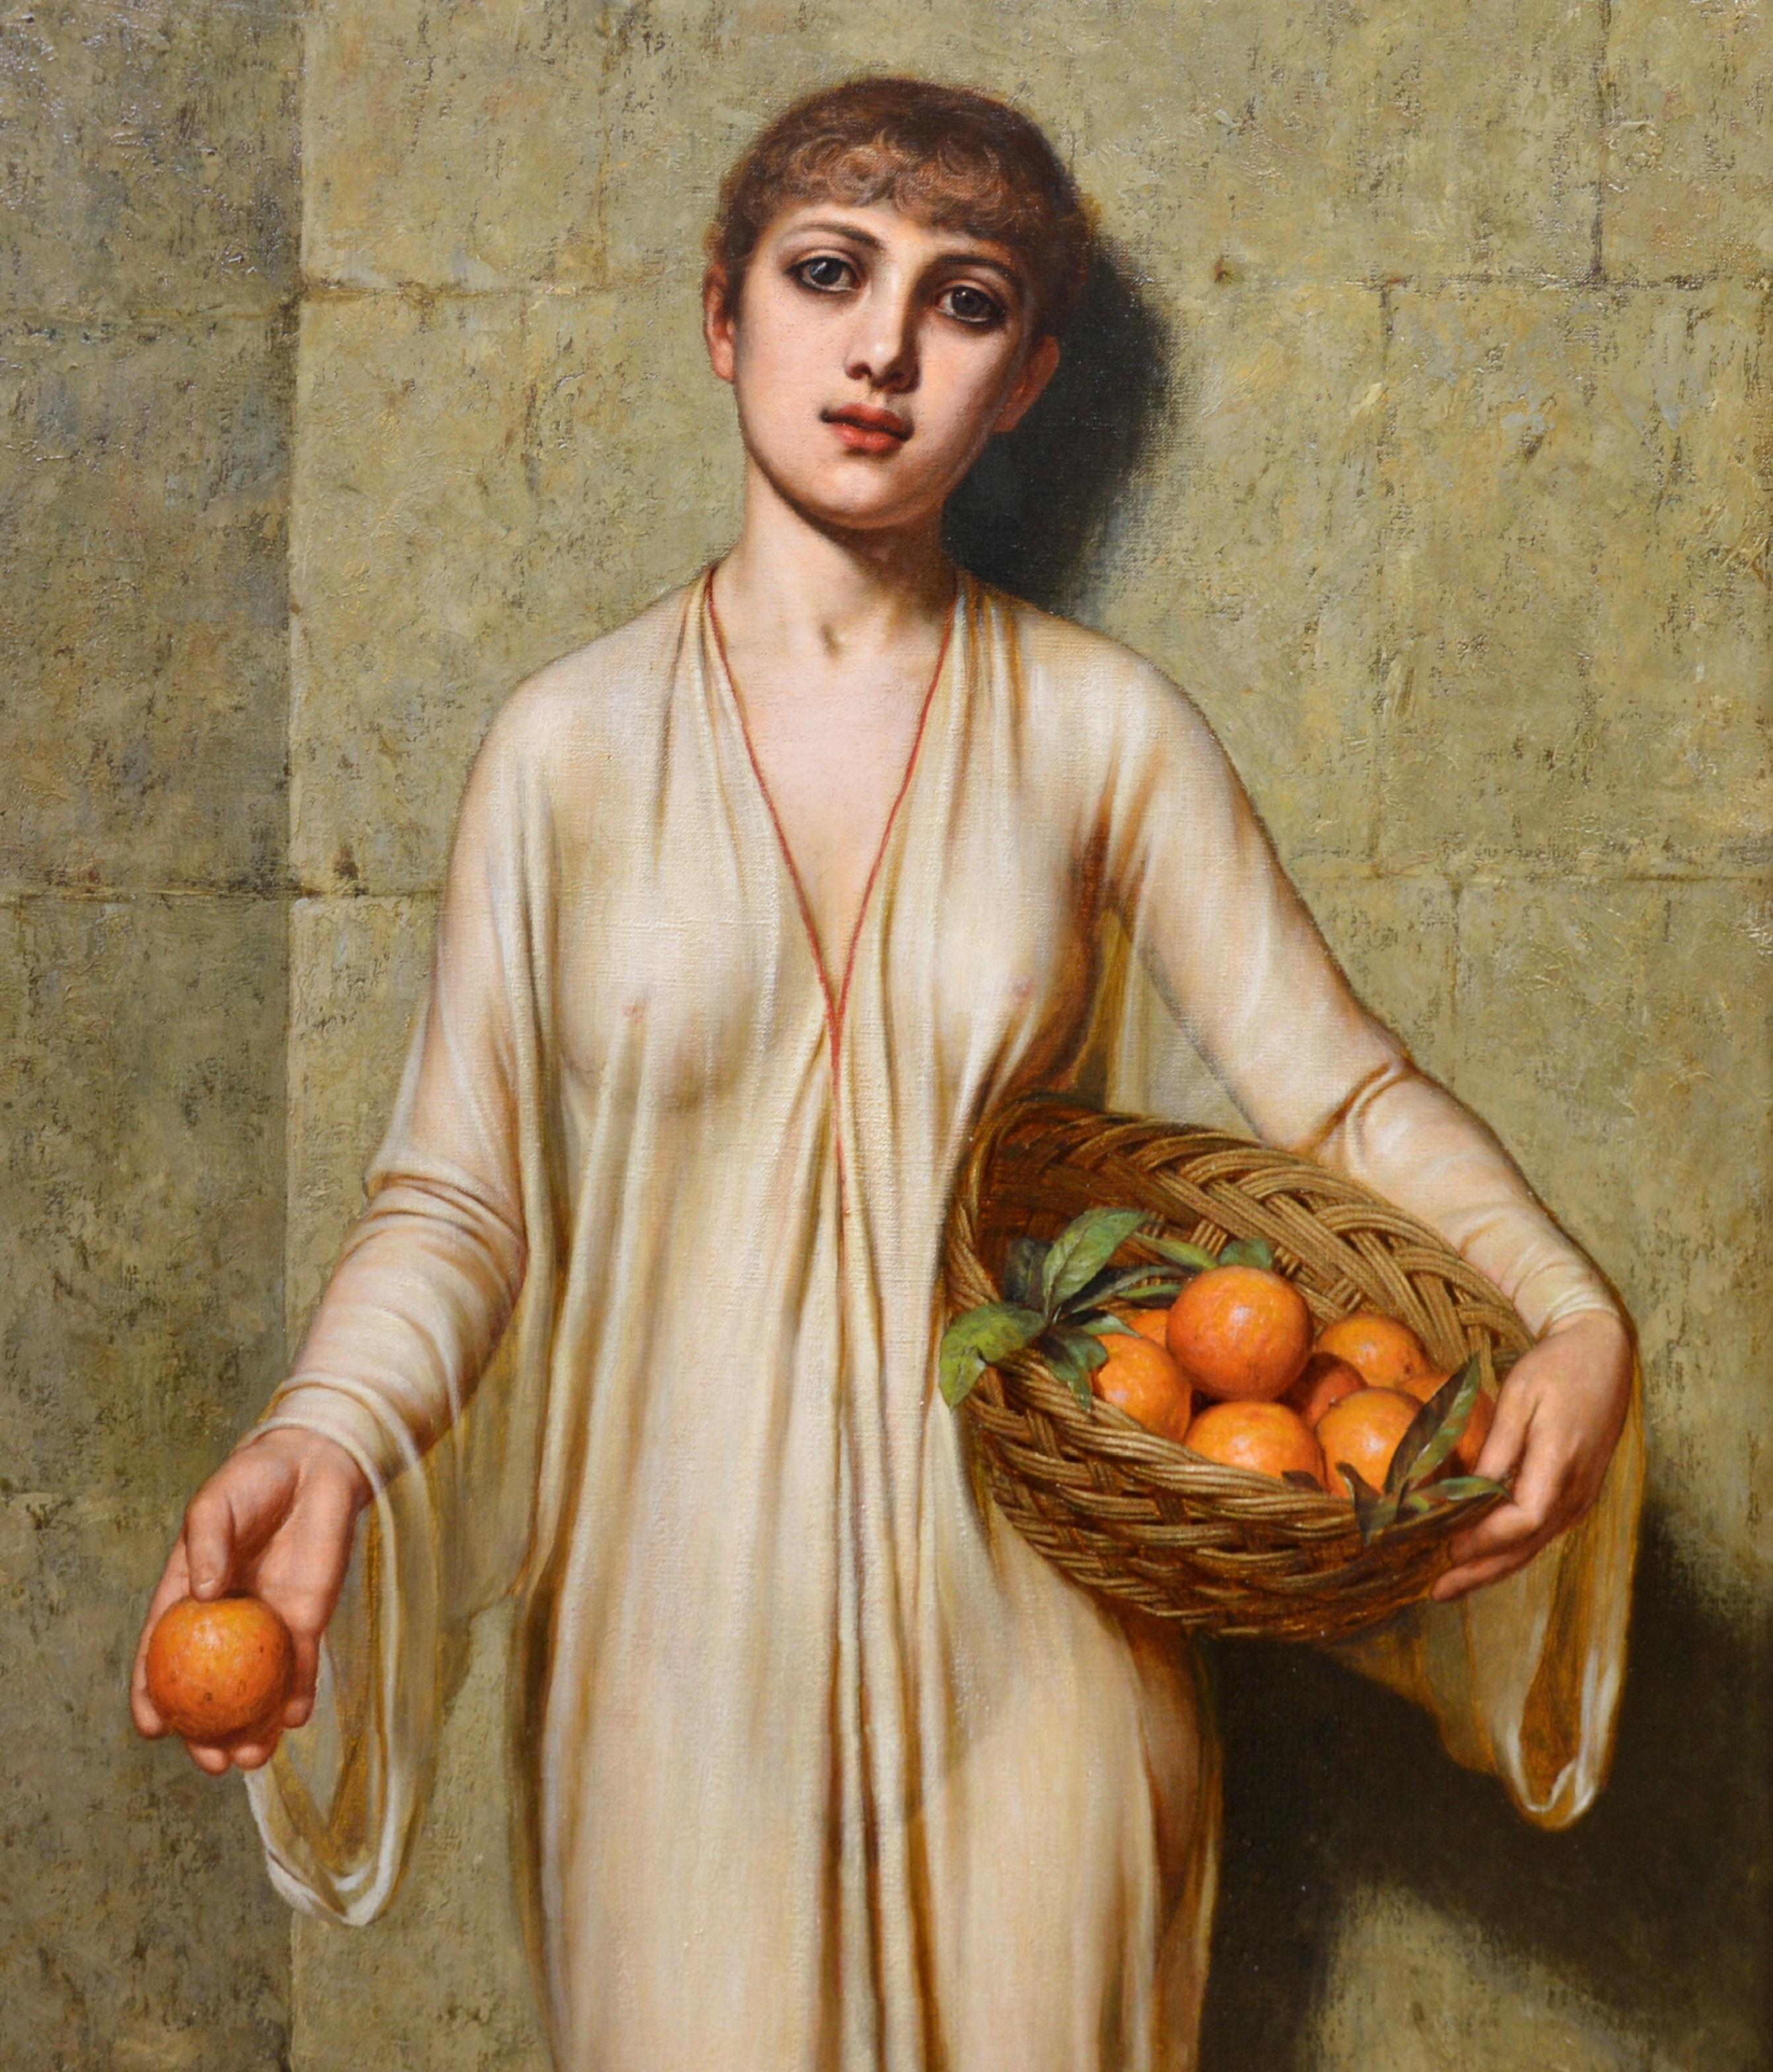 Oranges - 19th Century Neoclassical Portrait Oil Painting of Young Roman Girl 2